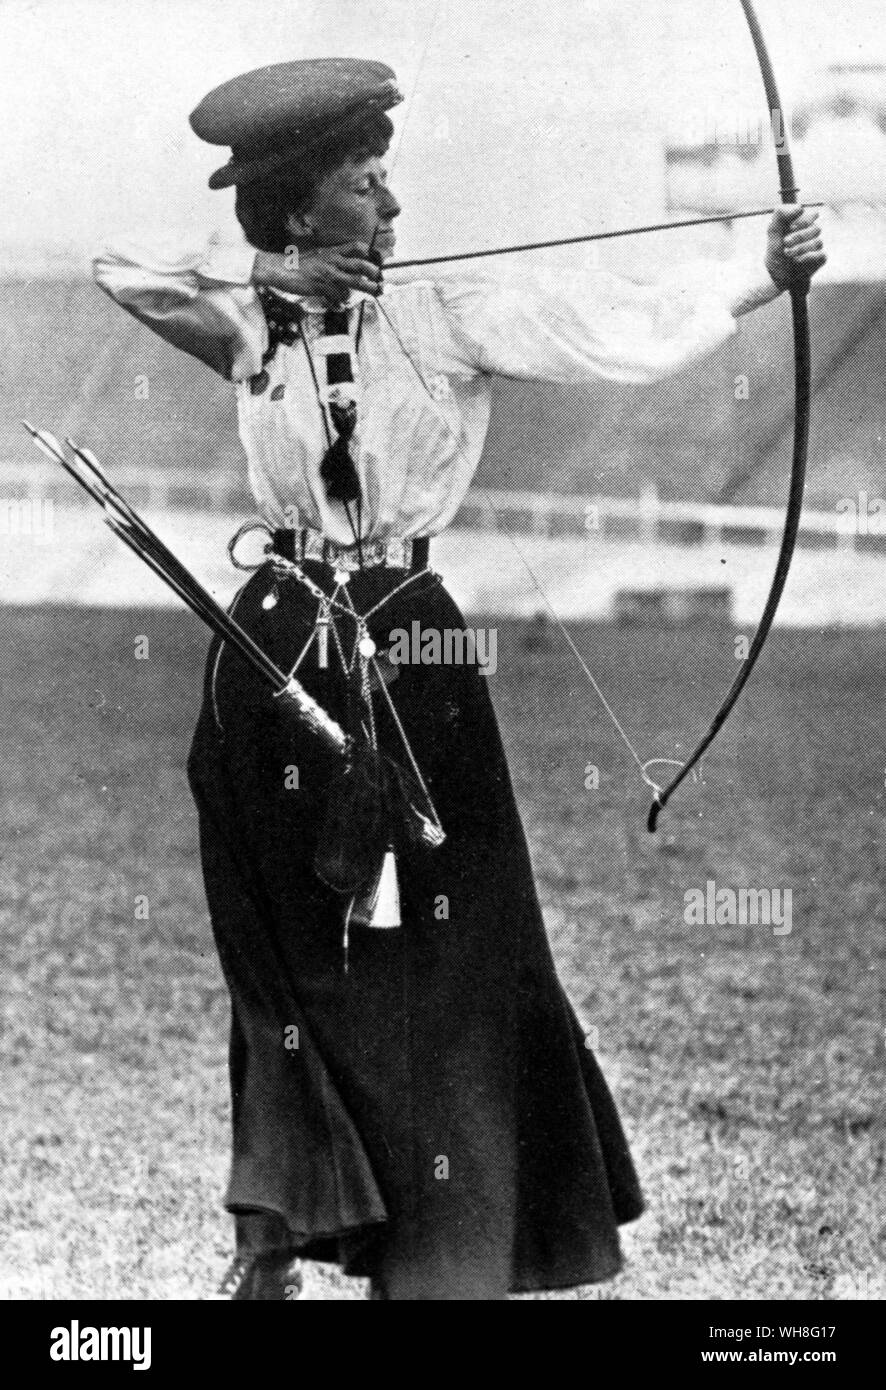 London Olympic Games 1908. Miss Q Newall (Great Britain), winner of the National Round. All the archery competitors were British, and the winner, Sybil Queenie Newall, is the oldest woman ever to win an Olympic gold medal, she was aged 53. The Olympic Games page 72. Stock Photo